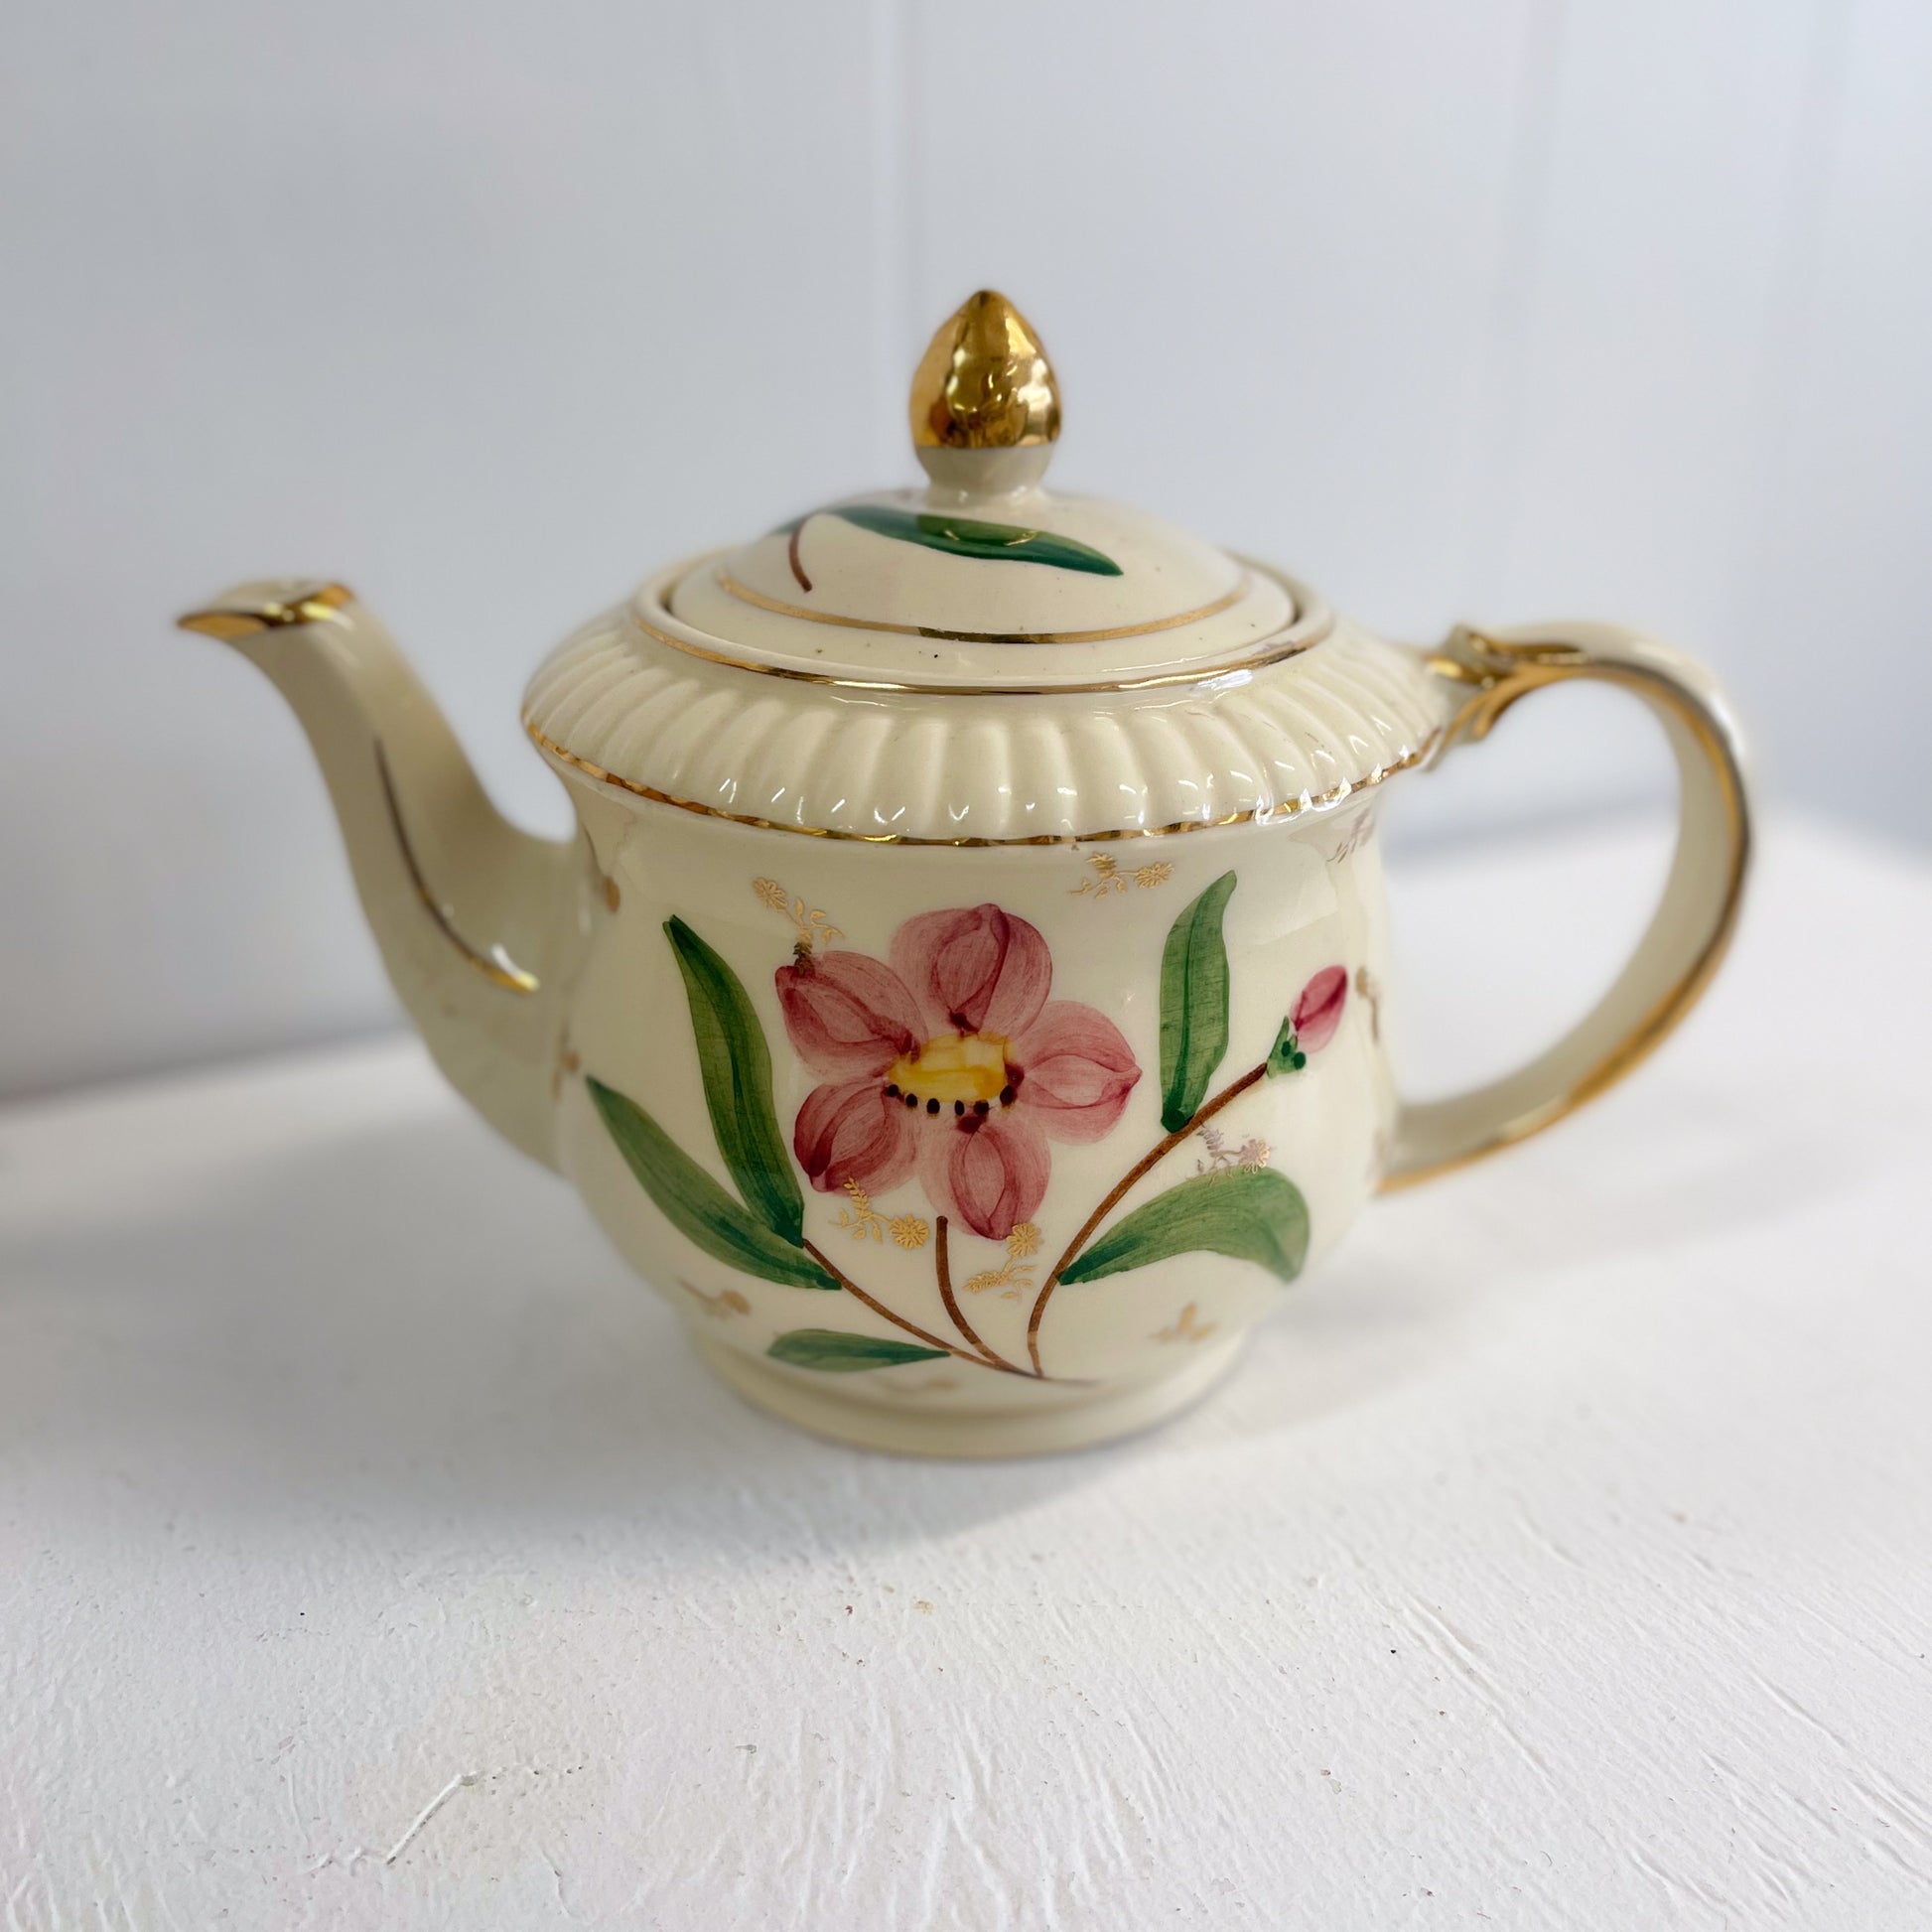 Floral Tea Pot by Shawnee Pottery USA